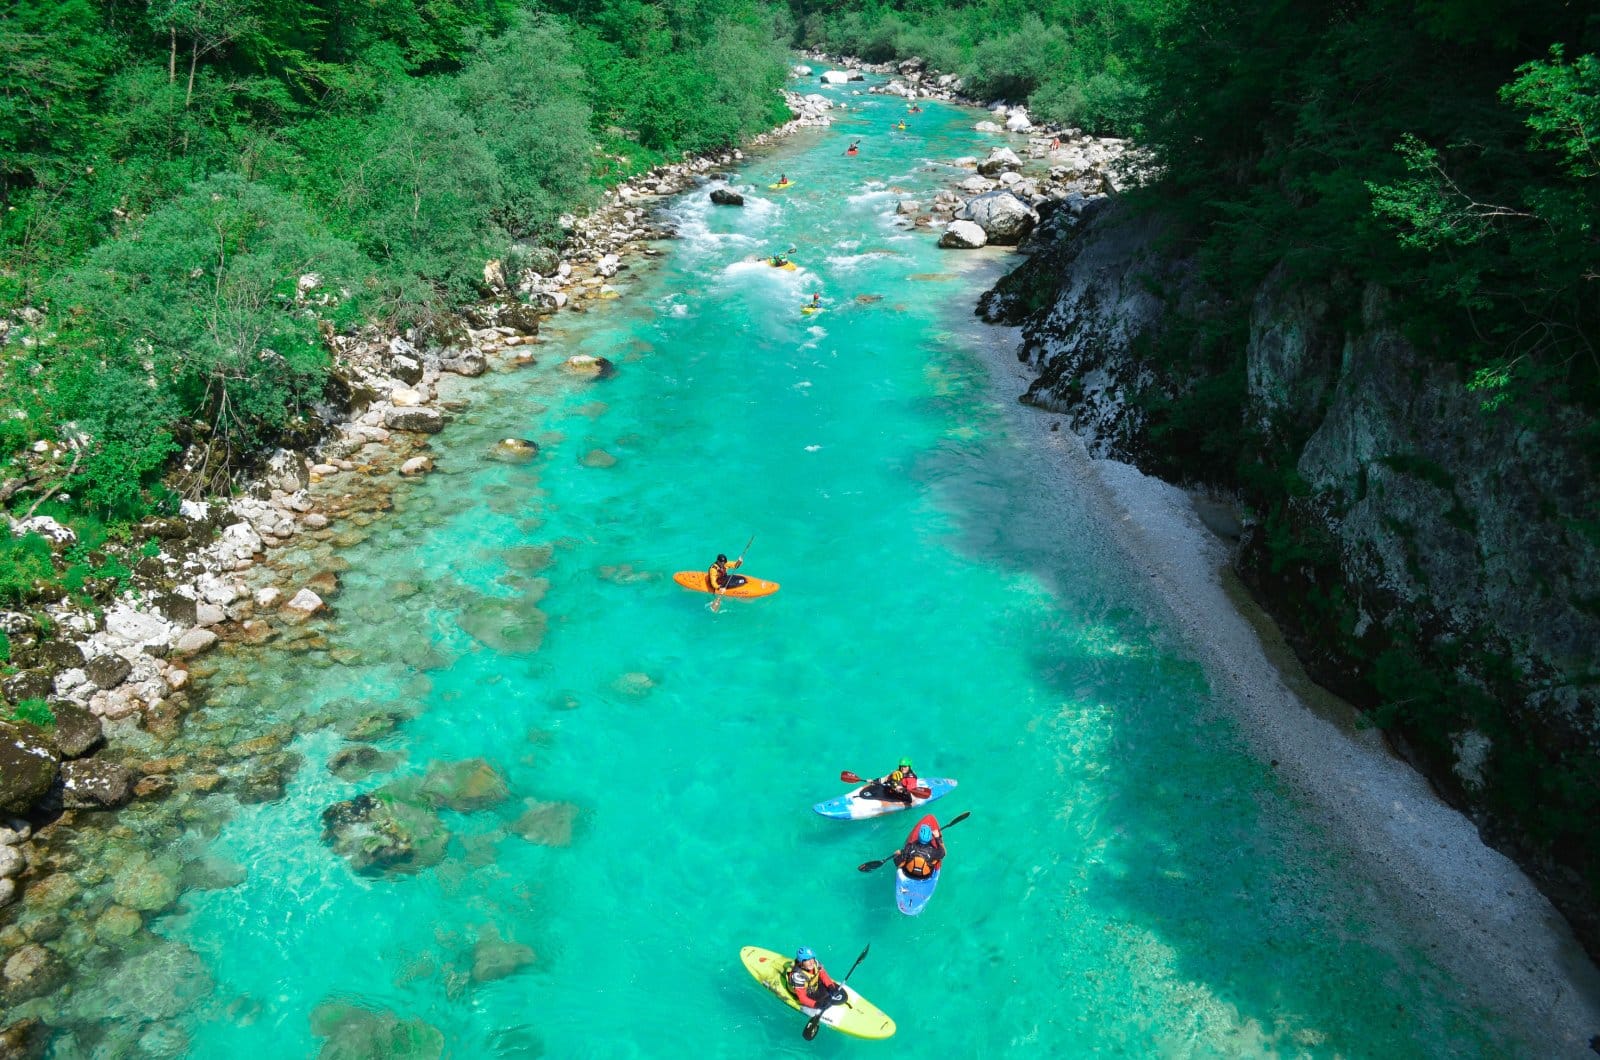 <p class="wp-caption-text">Image Credit: Shutterstock / Masa Drgan</p>  <p><span>The Soca River in Slovenia is renowned for its striking emerald green waters and the stunning alpine scenery through which it flows. This beautiful river offers a range of paddling experiences, from tranquil stretches perfect for beginners and families to more turbulent sections that challenge even seasoned canoeists and kayakers. The Soca Valley, with its lush forests, rugged mountains, and charming Slovenian villages, provides a picturesque setting for camping and outdoor activities. The river is also rich in history, having been a frontline during World War I, with several historical trails and museums in the area dedicated to this period.</span></p>